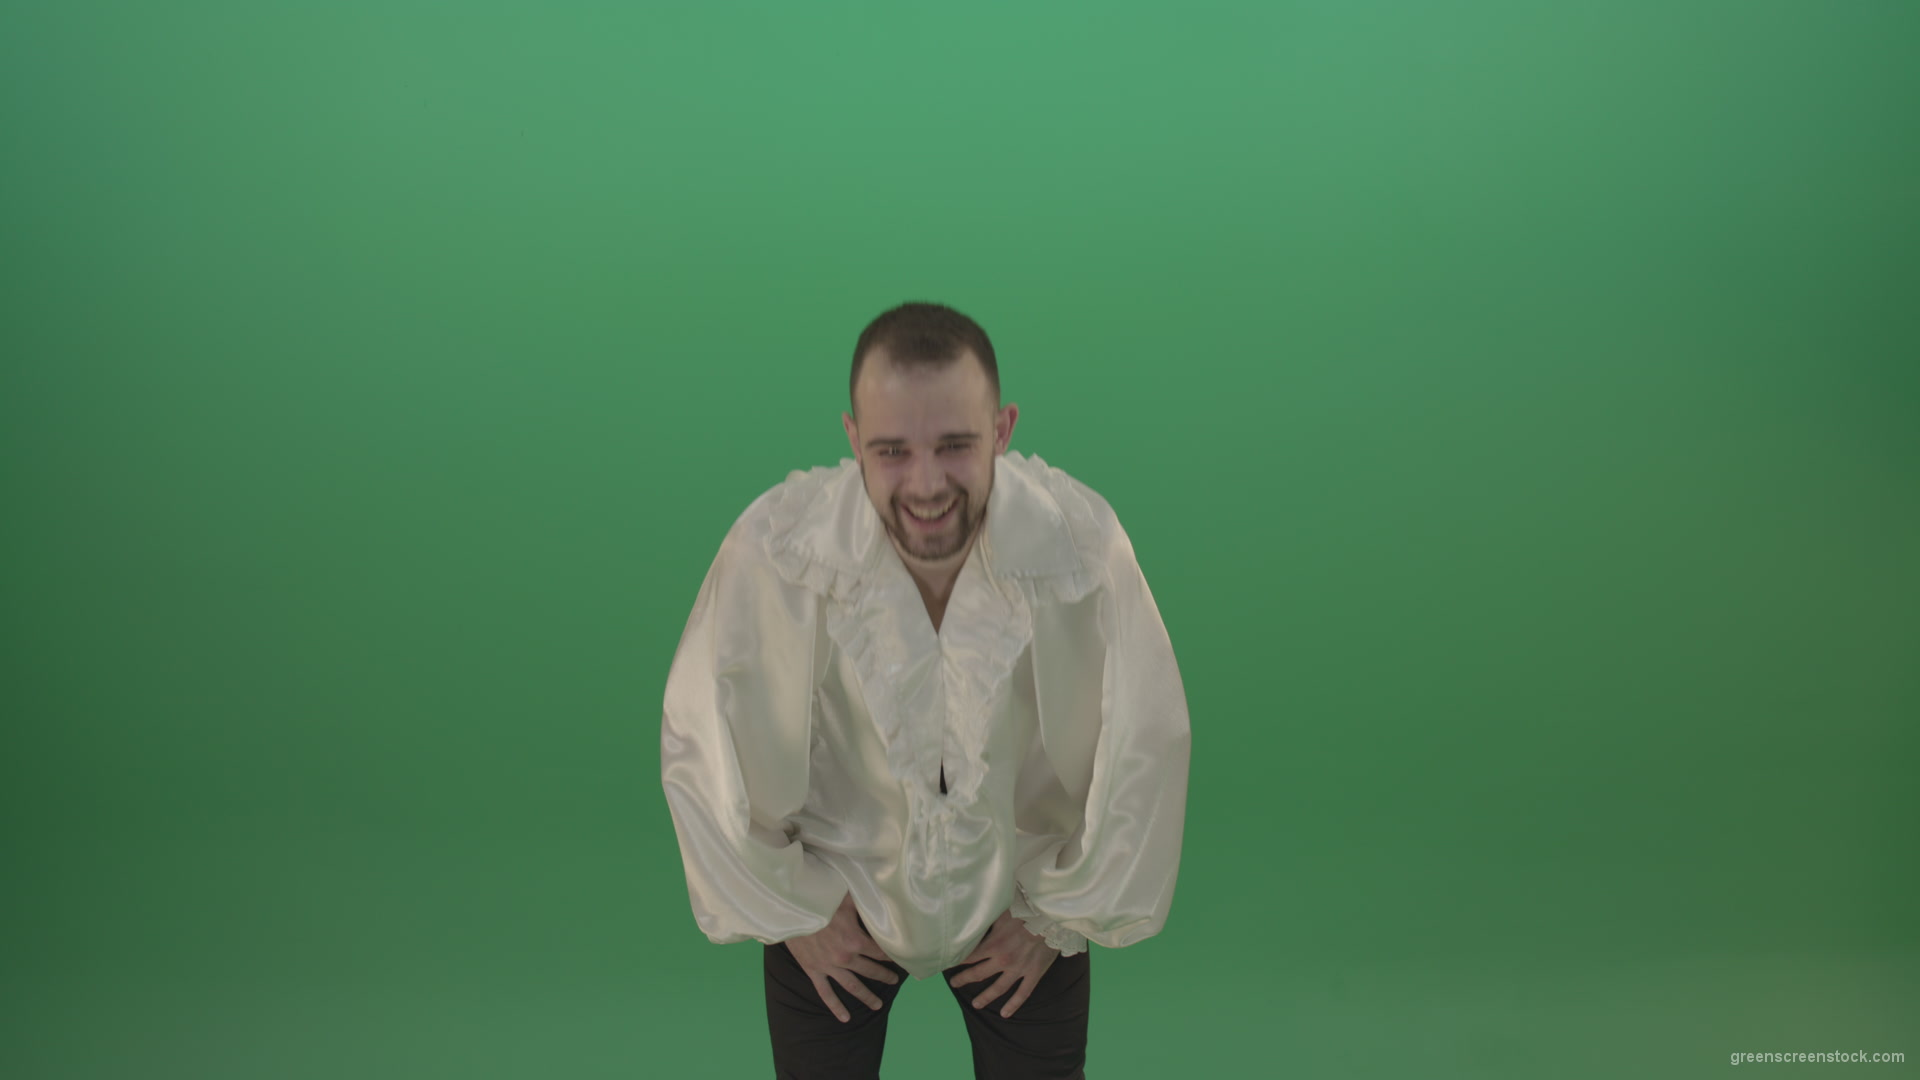 vj video background Scarry-laughing-from-the-professional-actor-in-white-shirt-isolated-on-green-screen-background_003